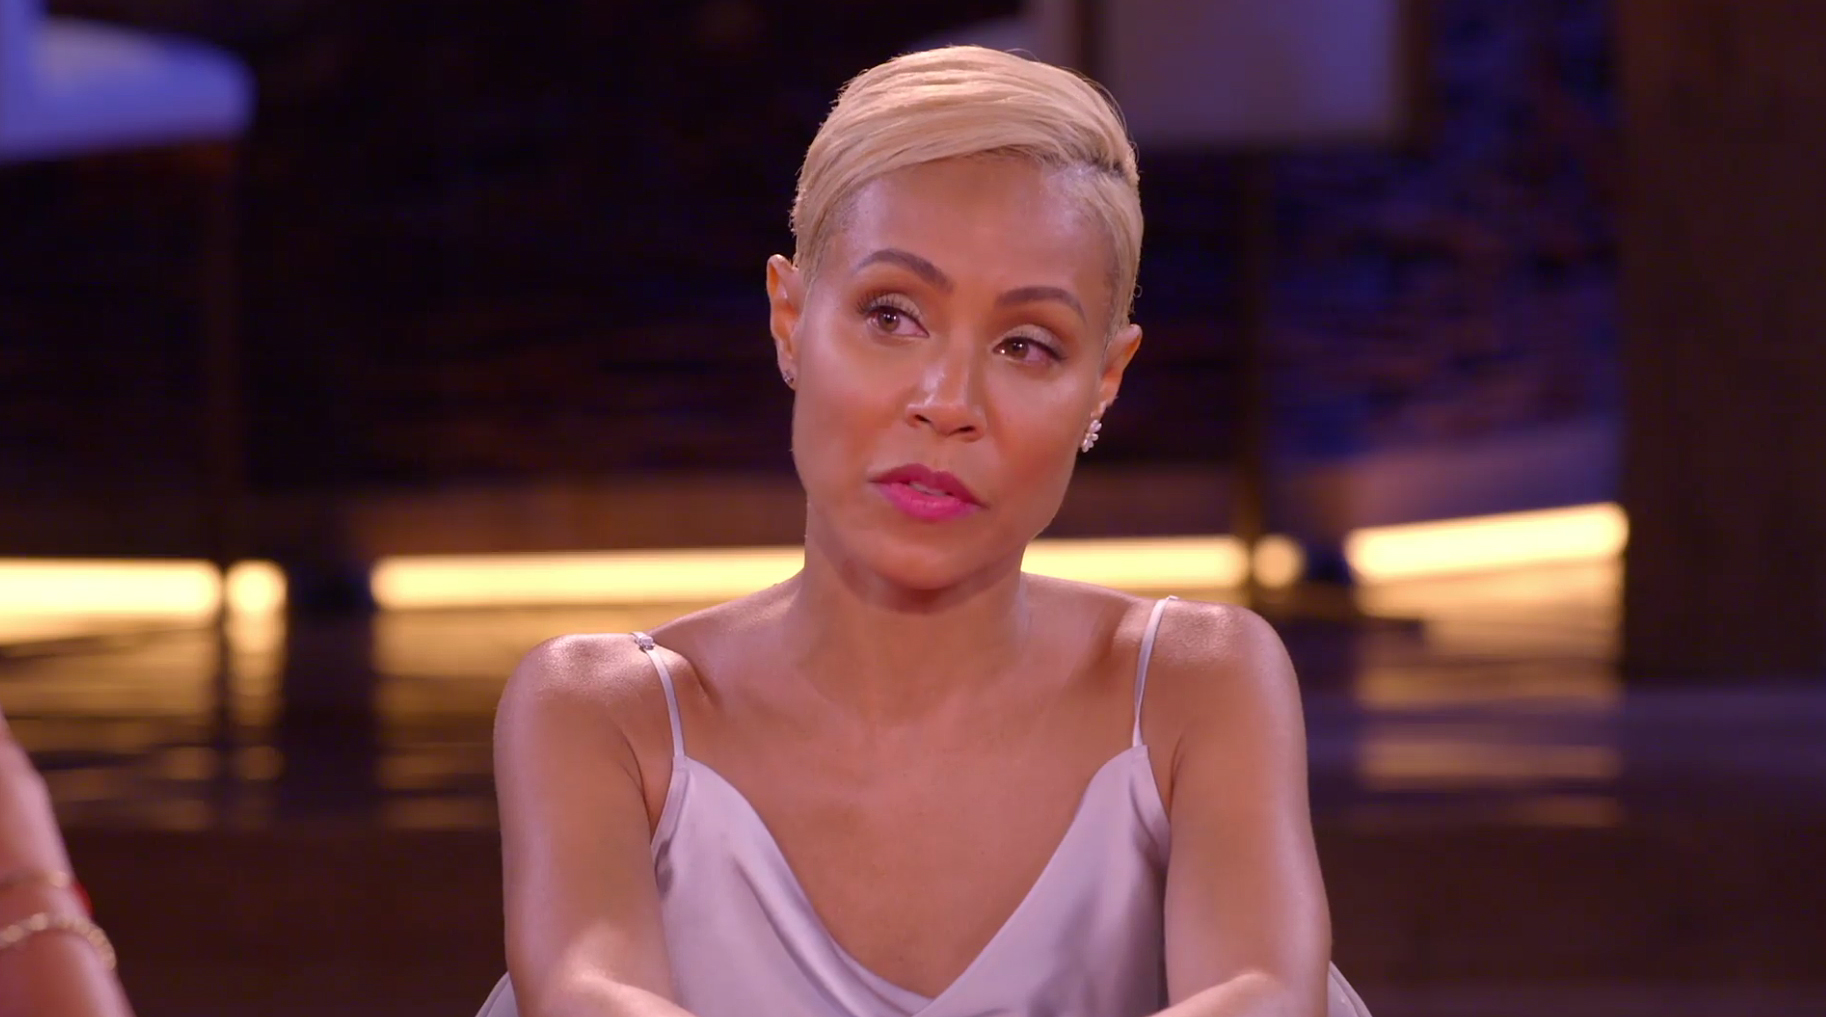 [WATCH] The “Jada Brings Herself to the Table” of ‘Red Table Talk’ is Now Available